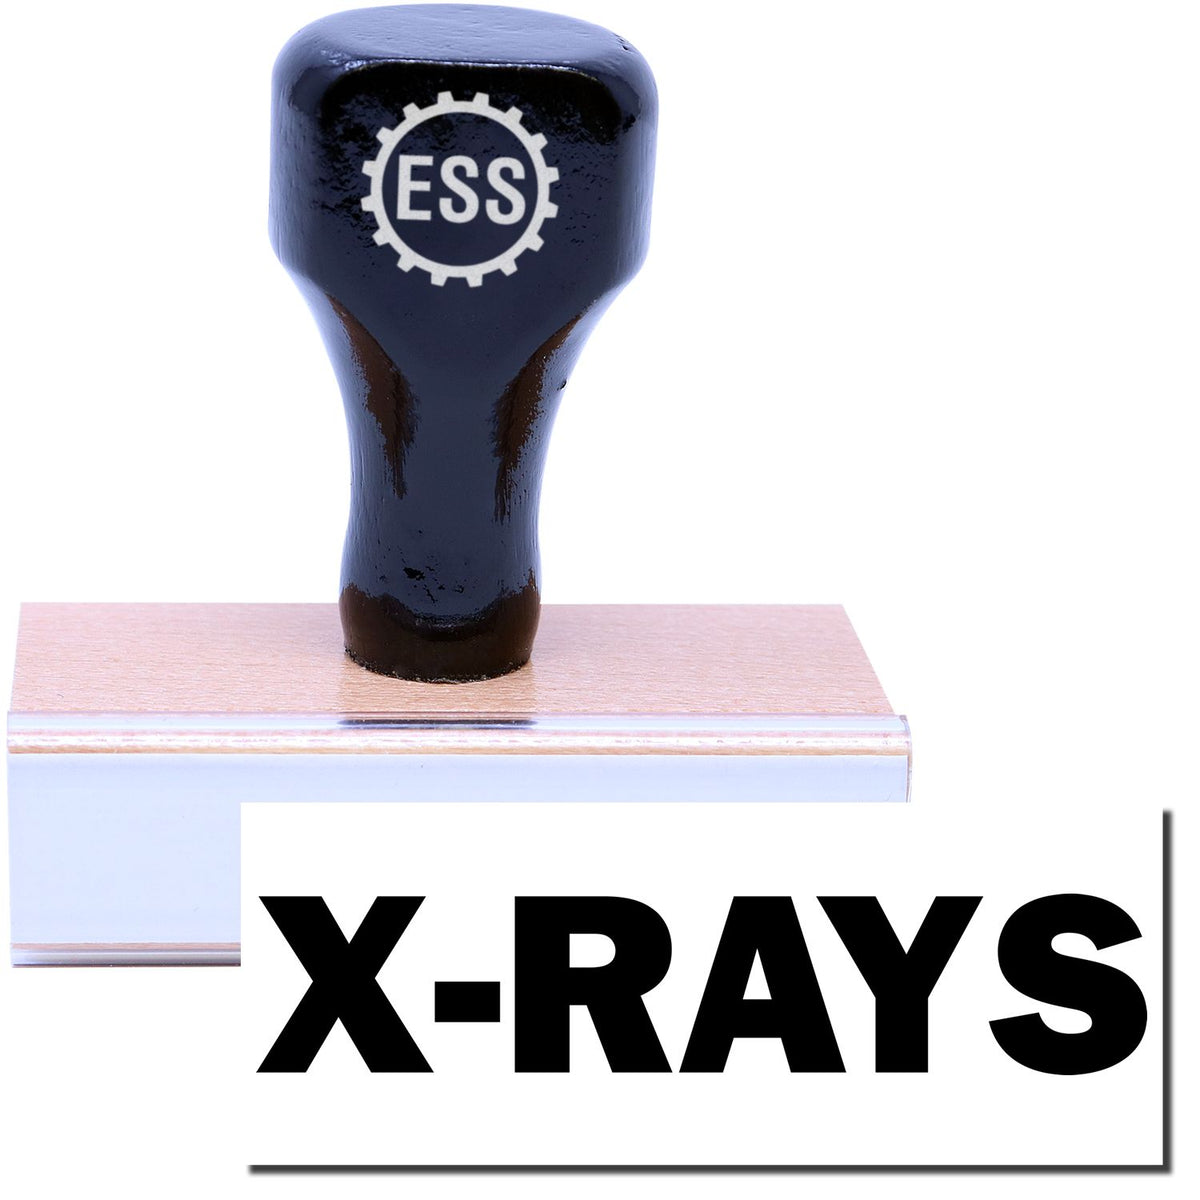 A stock office rubber stamp with a stamped image showing how the text &quot;X-RAYS&quot; in a large font is displayed after stamping.